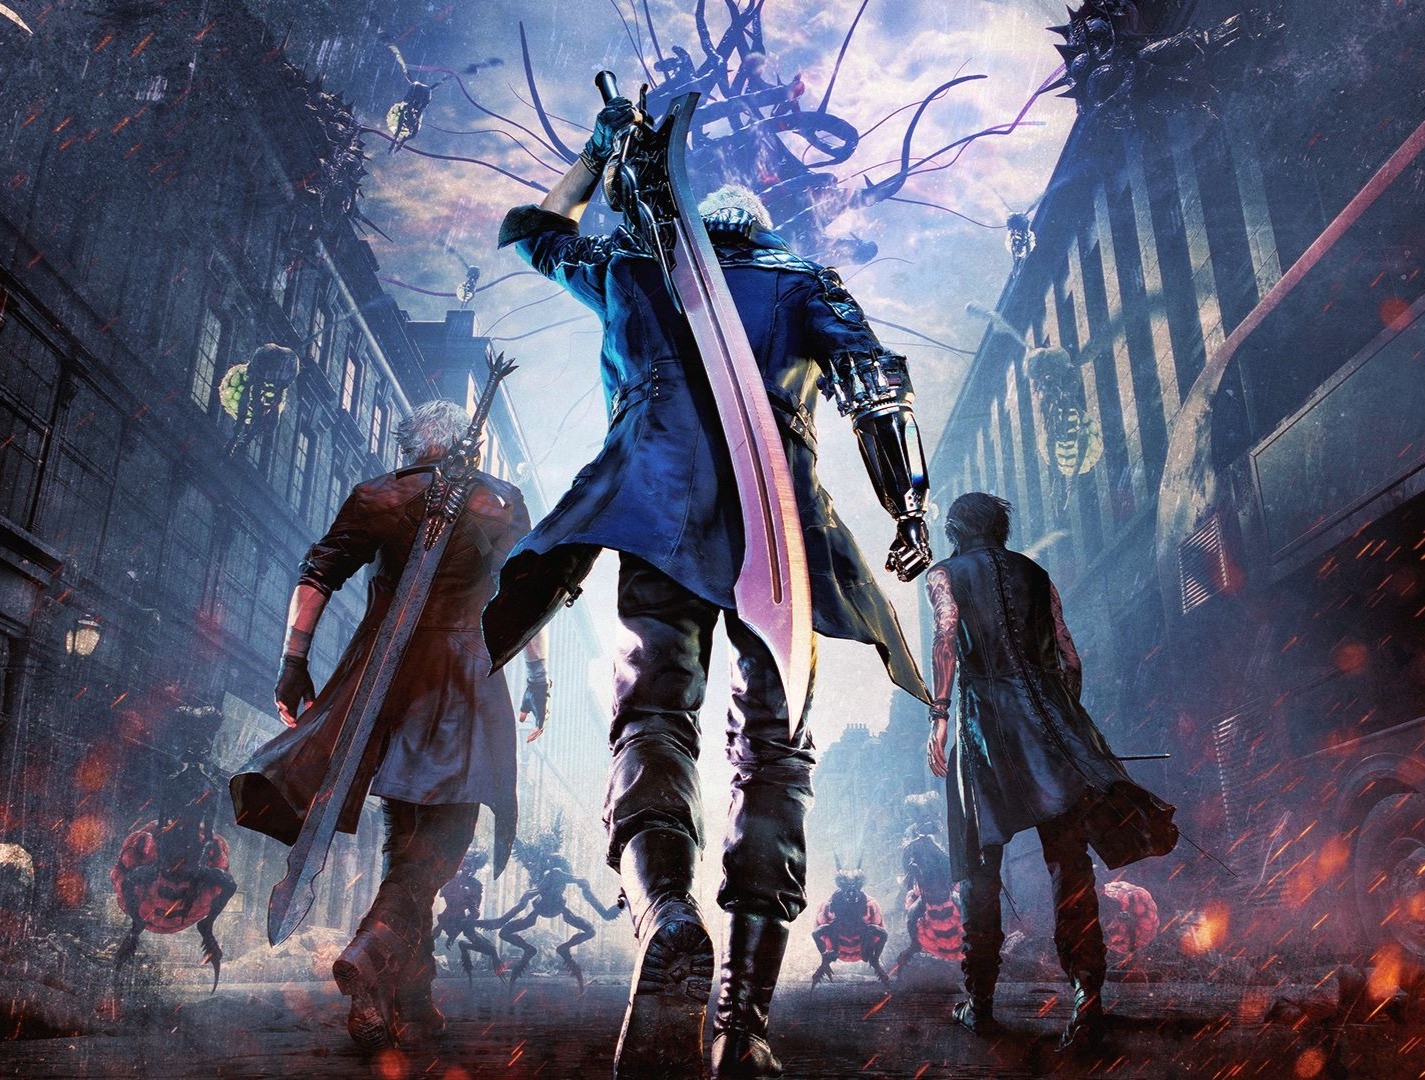 v devil may cry 5 book